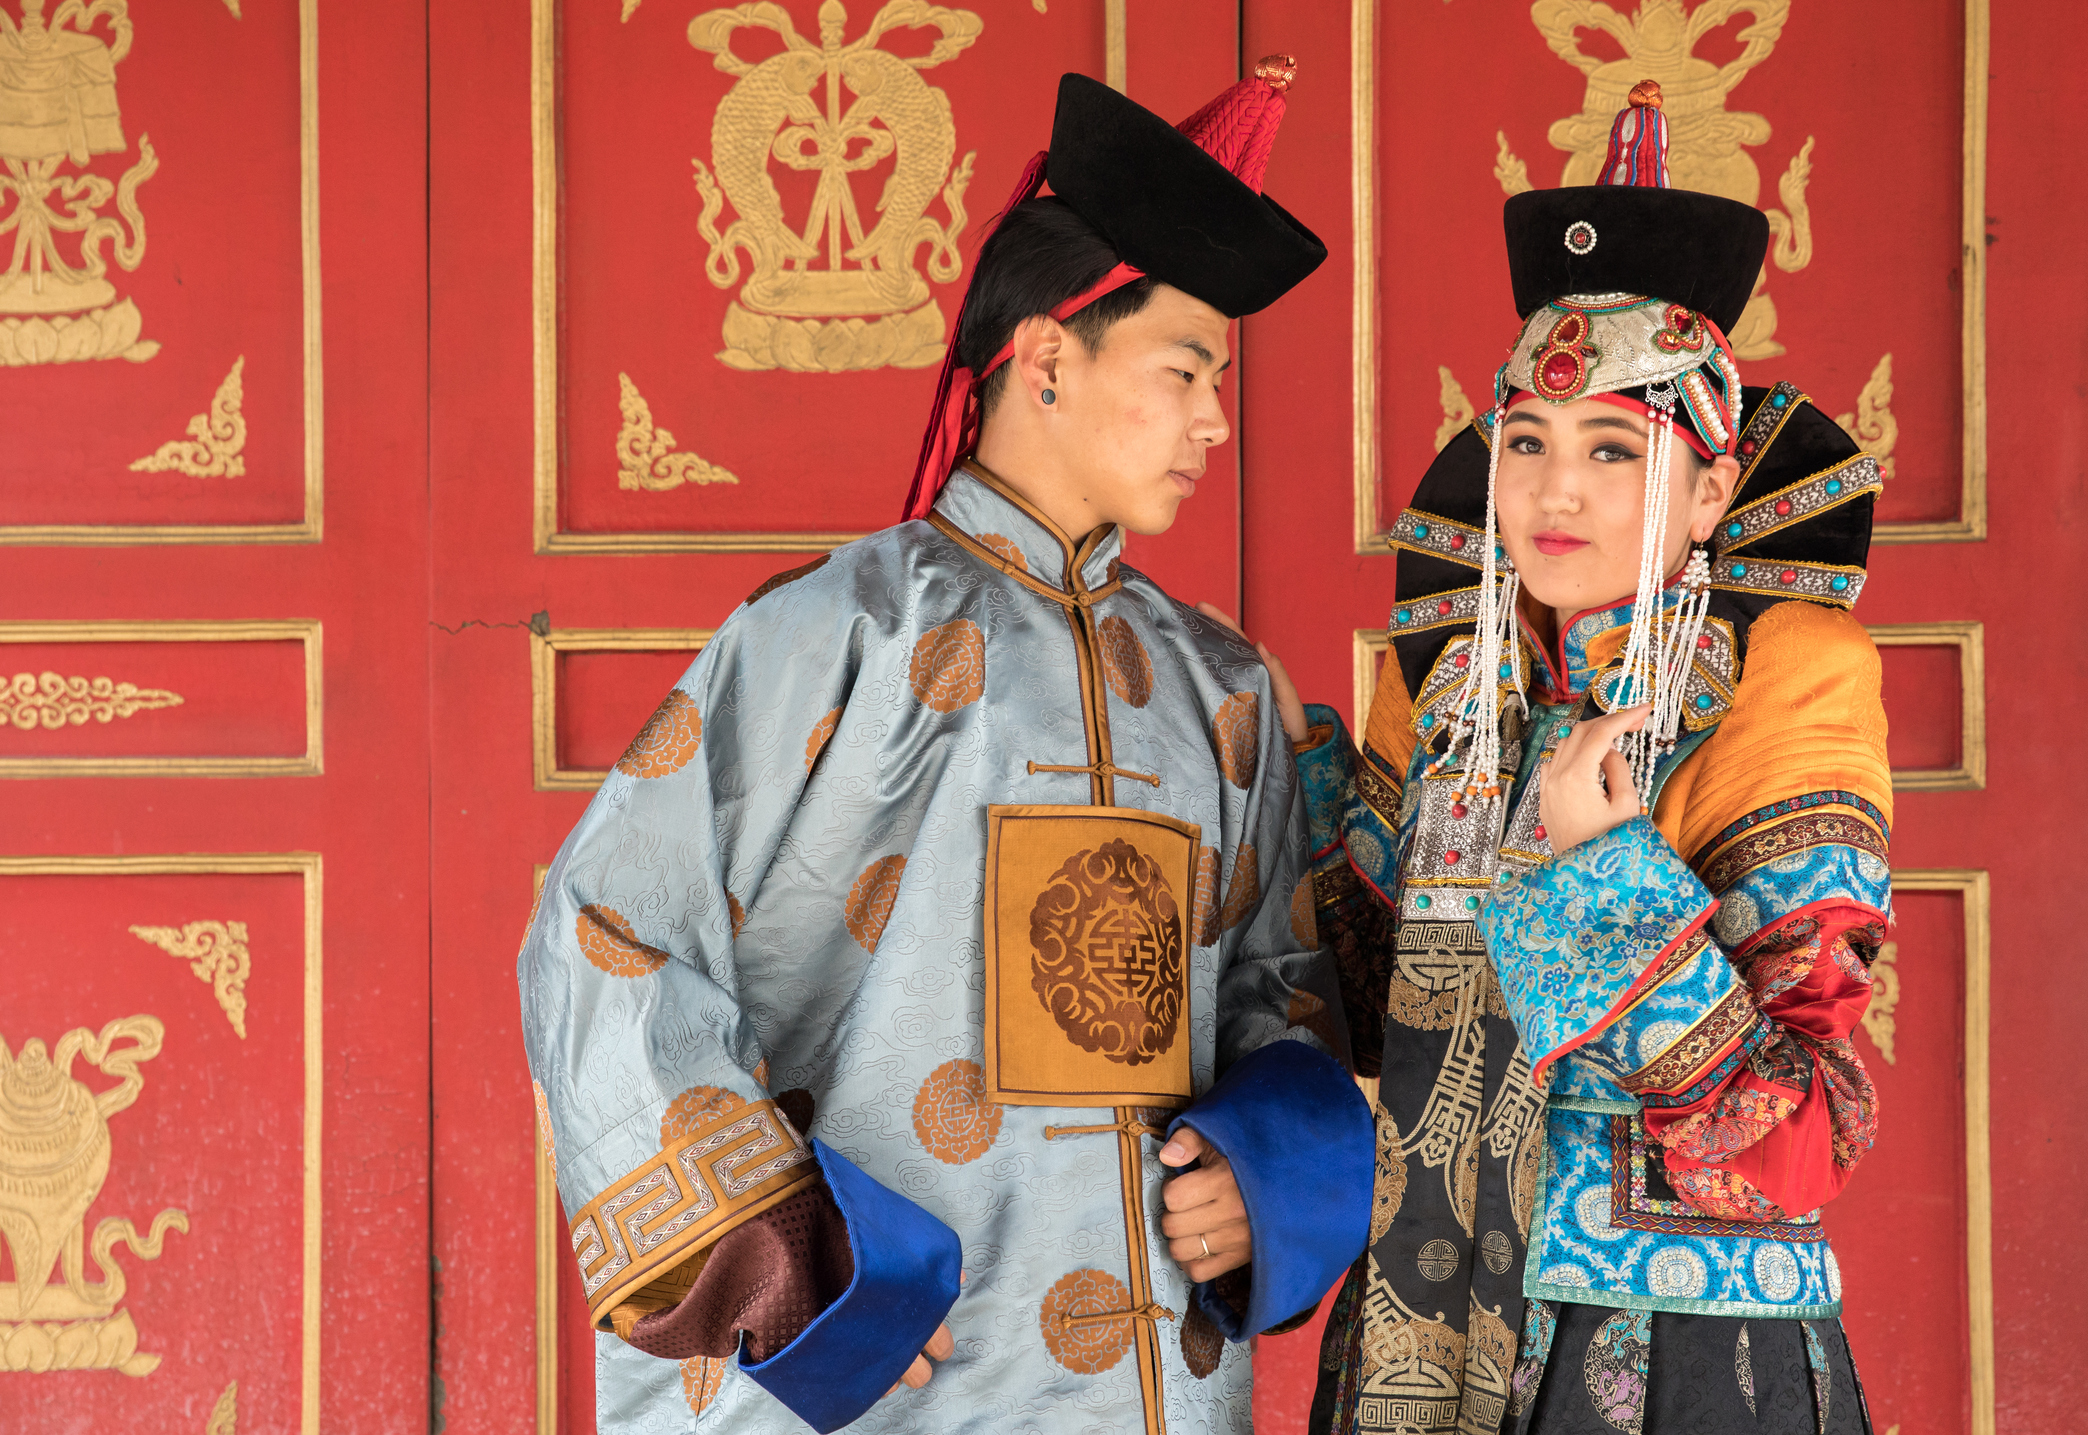 A picture of a Mongolian family in traditional clothing